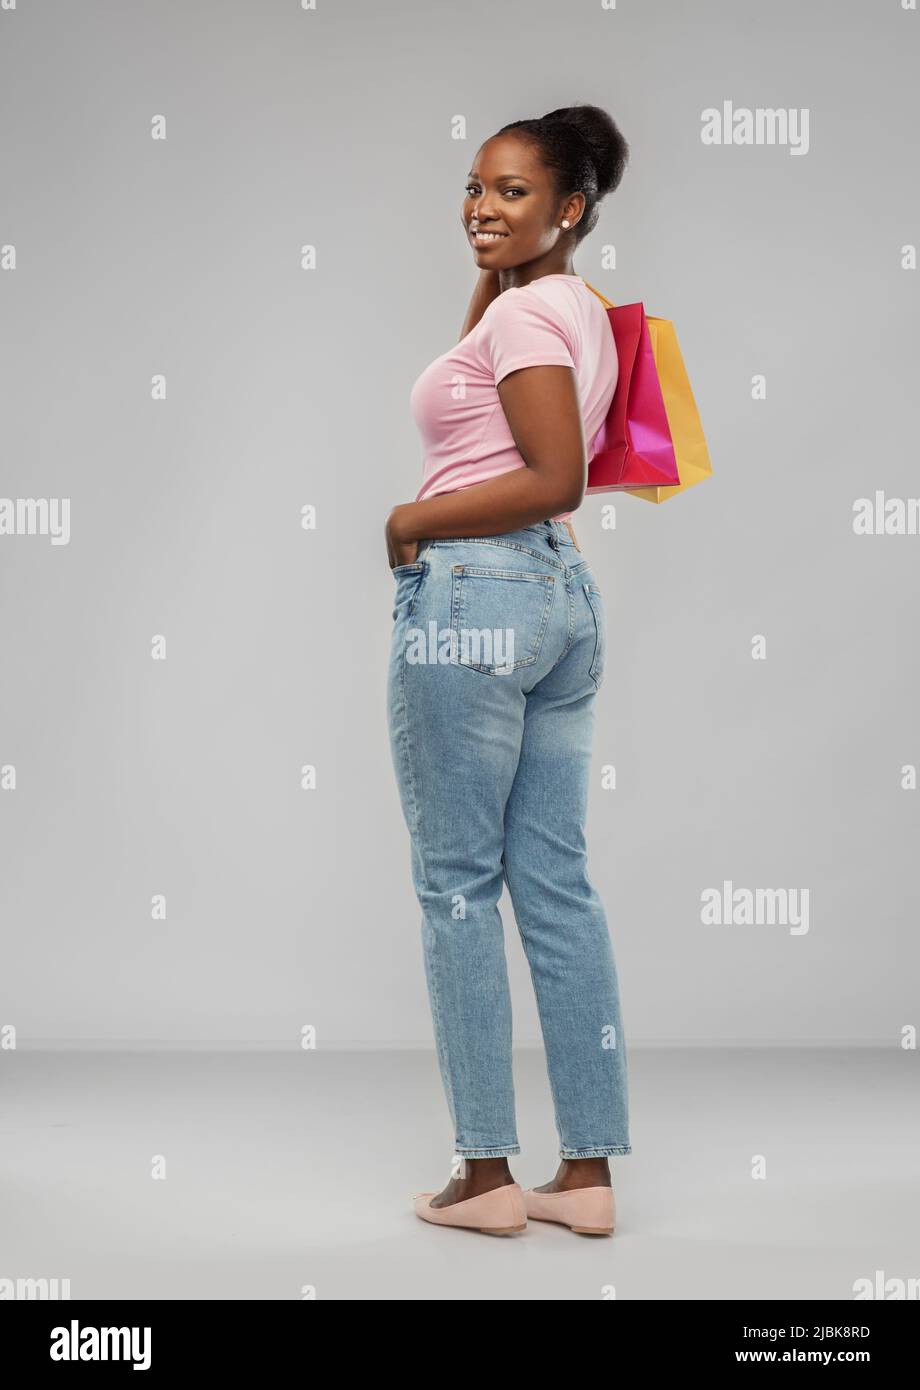 happy african american woman with shopping bags Stock Photo